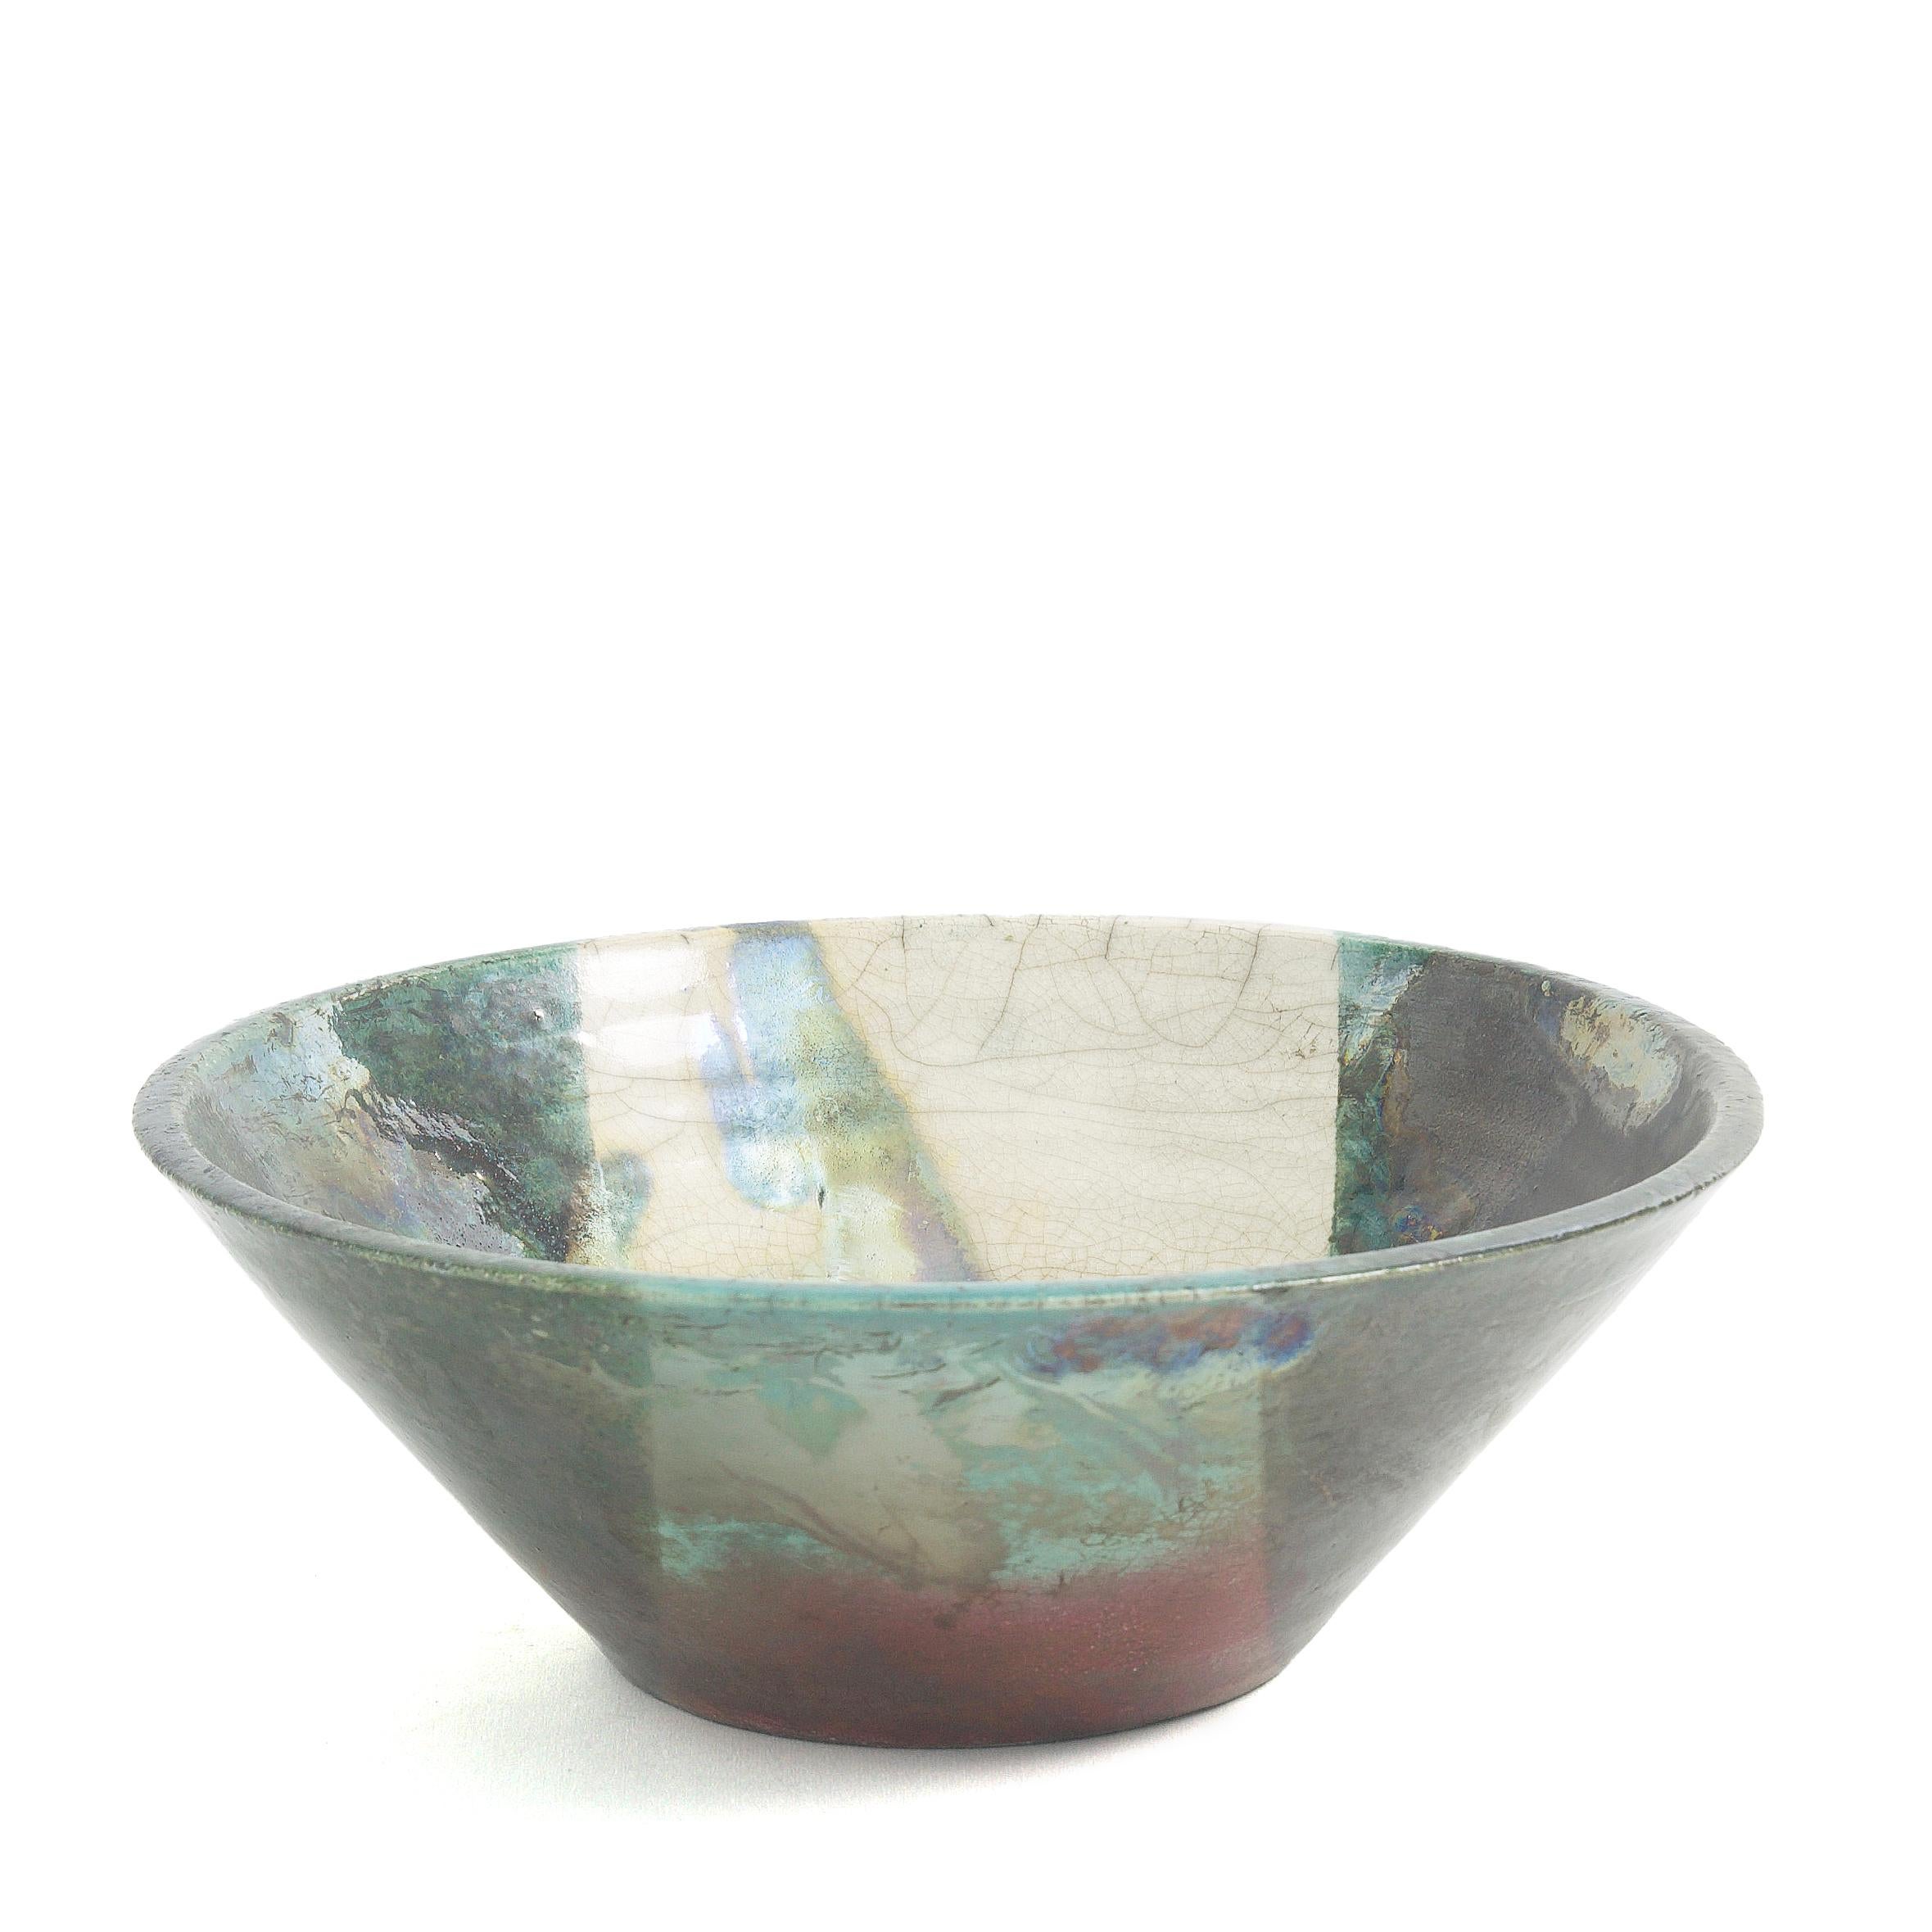 Japanese Minimalistic LAAB Aurora Set of 4 Bowls Raku Ceramics White Green Metal In New Condition For Sale In monza, Monza and Brianza